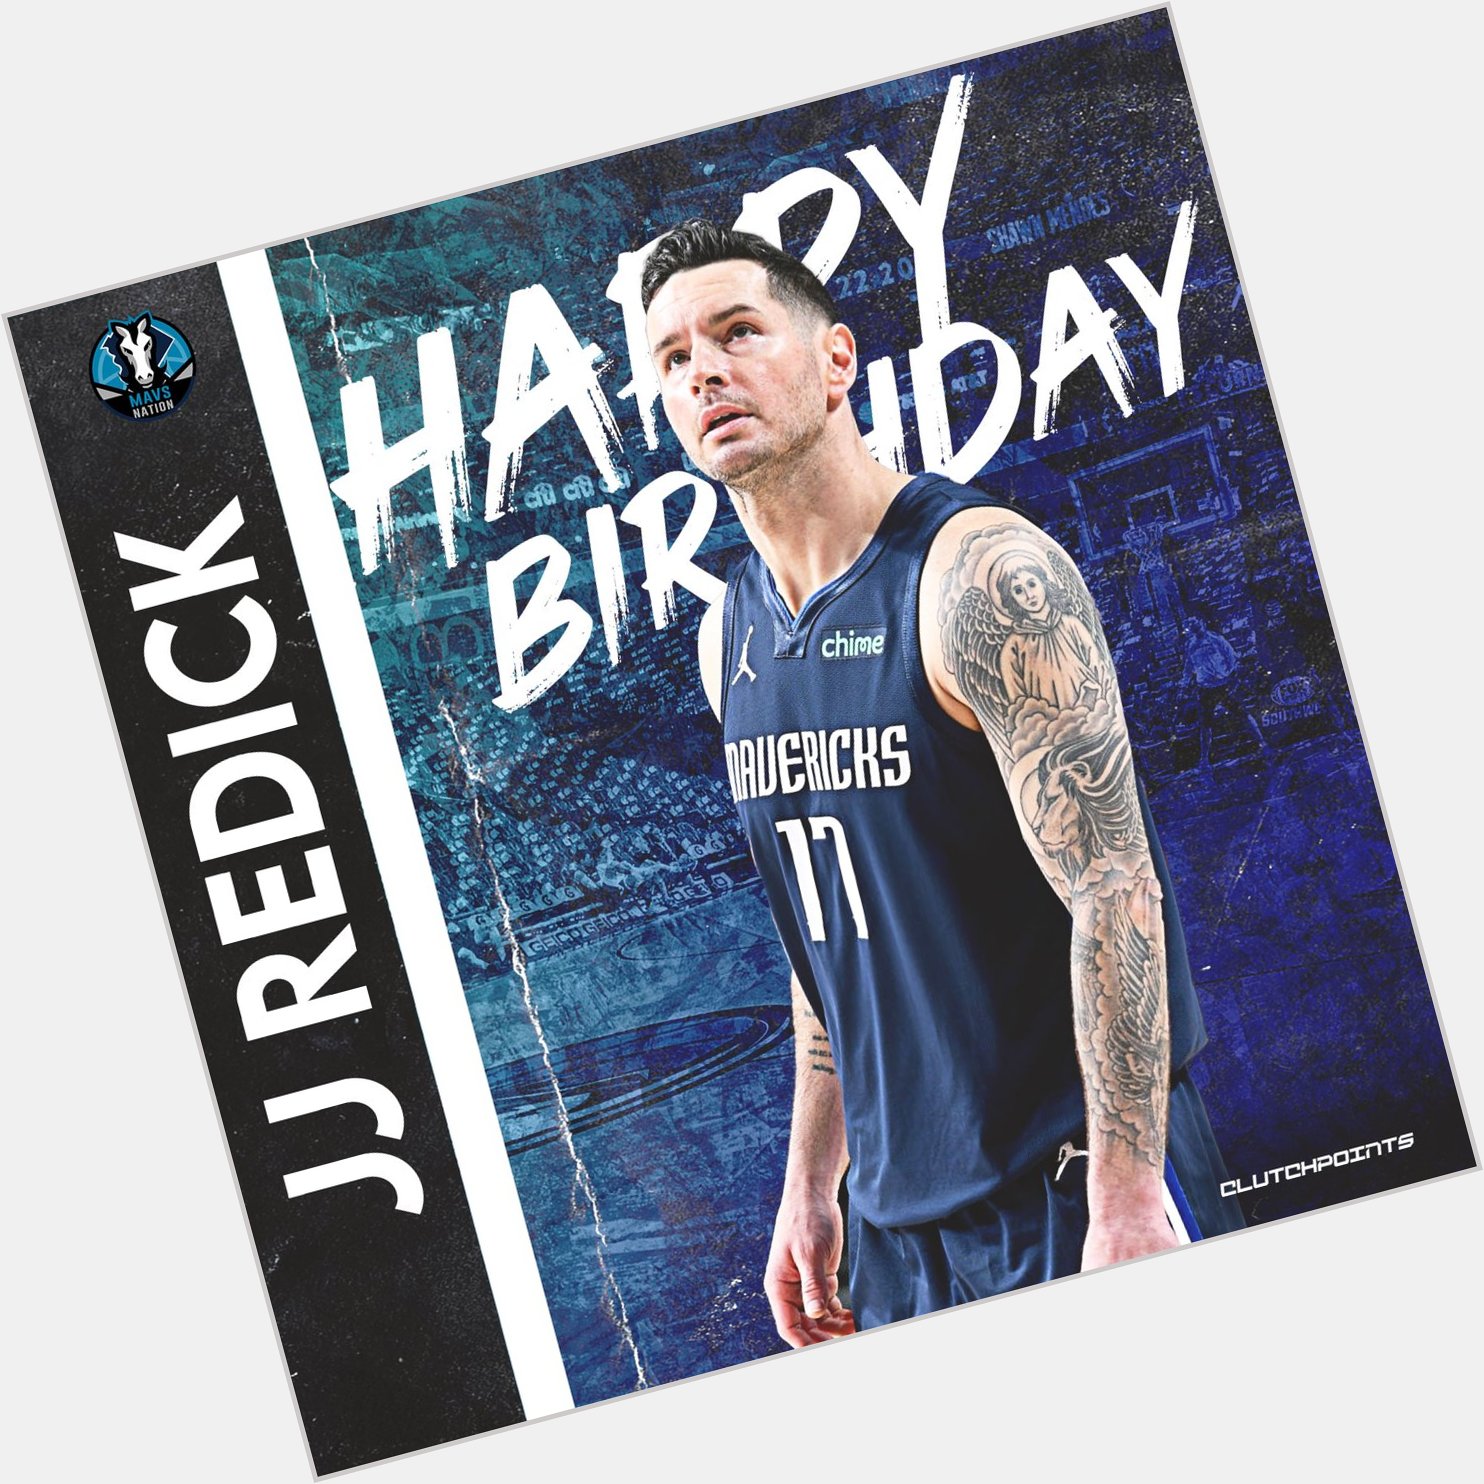 Join Mavs Nation in wishing JJ Redick a happy 37th birthday!  